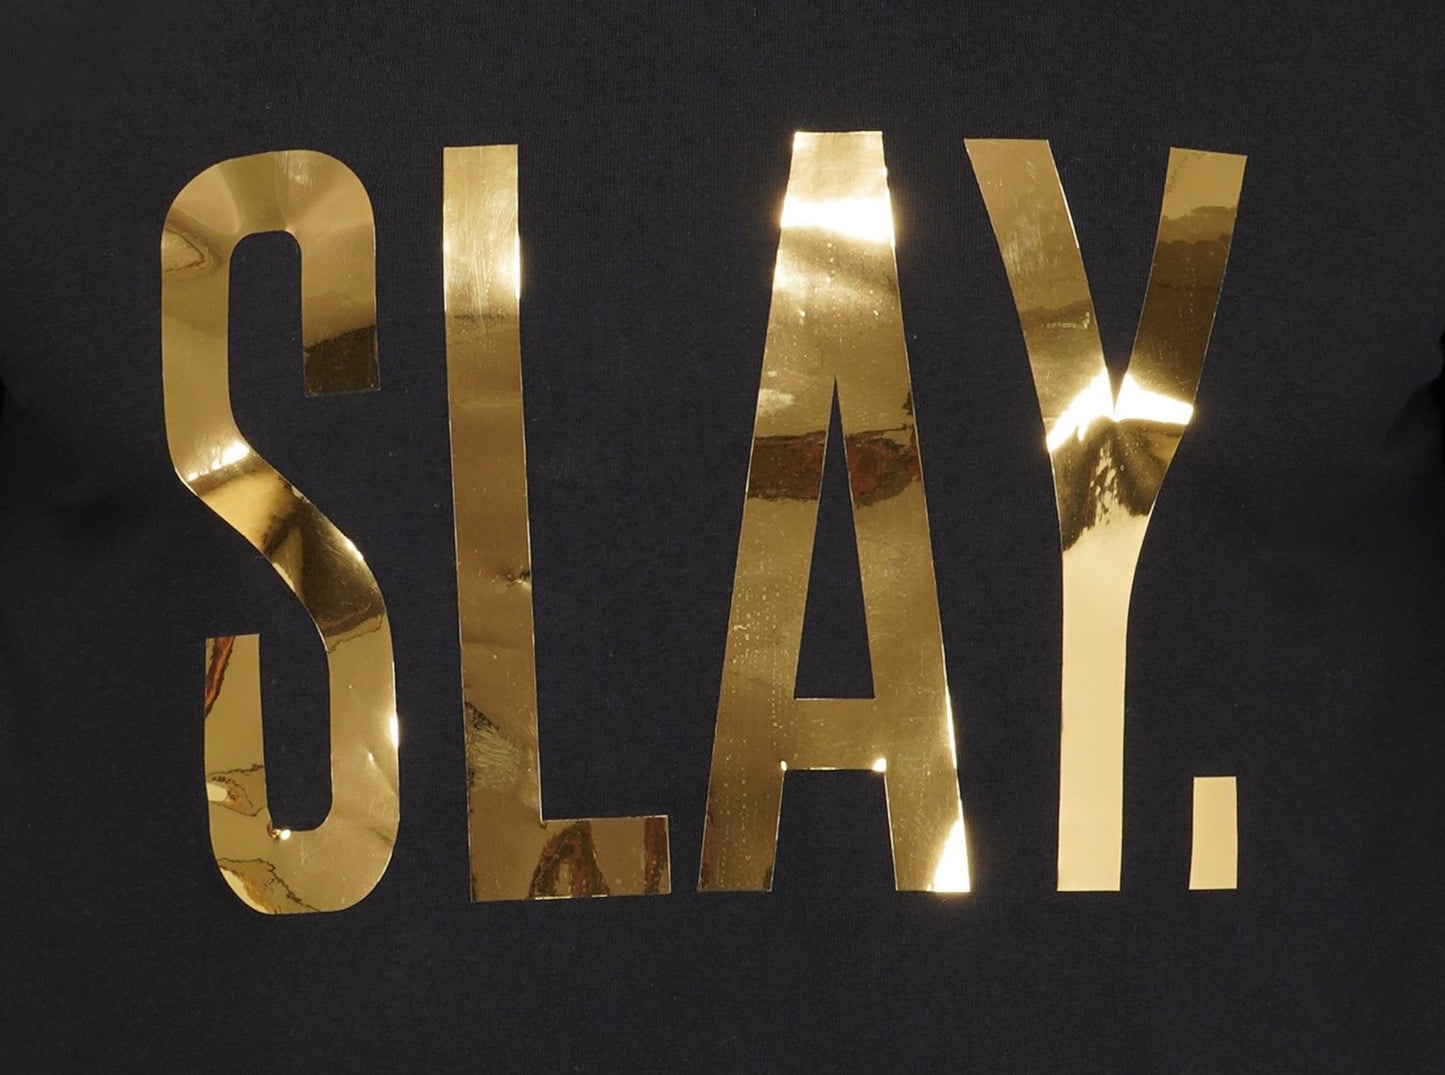 SLAY. Women's Limited Edition Gold Foil Reflective Print Crop Top-clothing-to-slay.myshopify.com-Crop Top